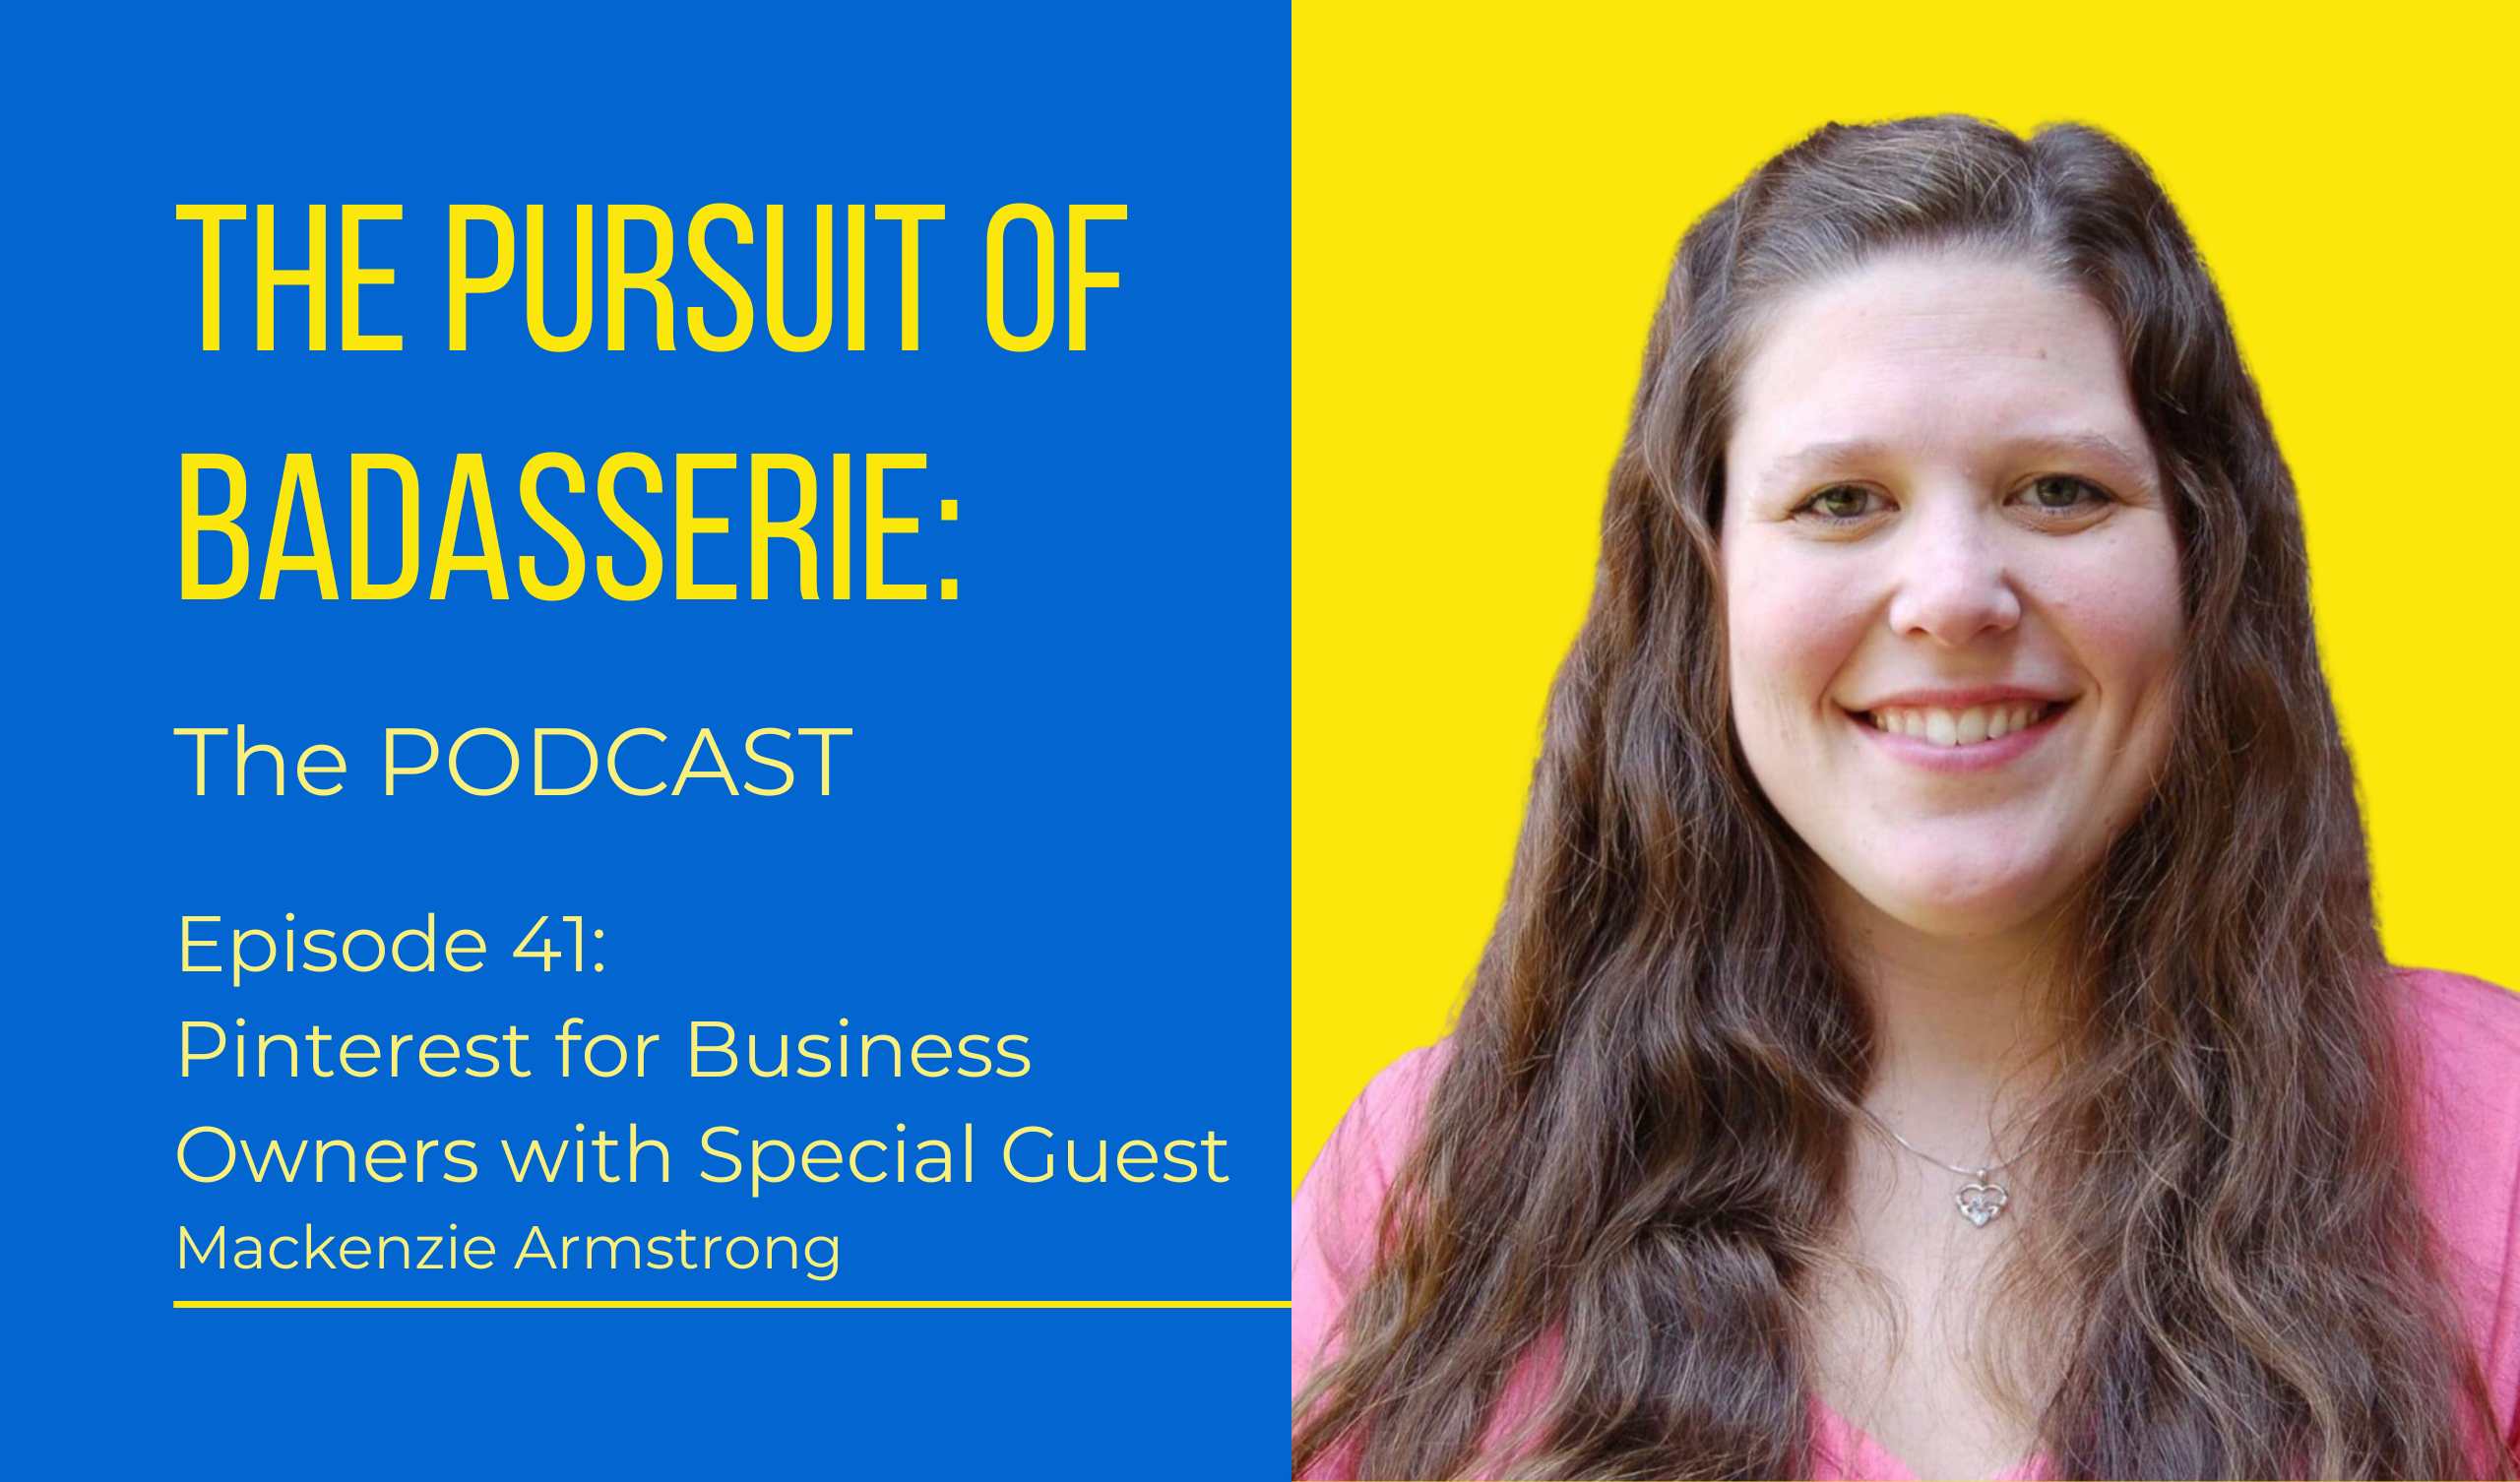 Mackenzie Armstrong on The Pursuit of Badasserie